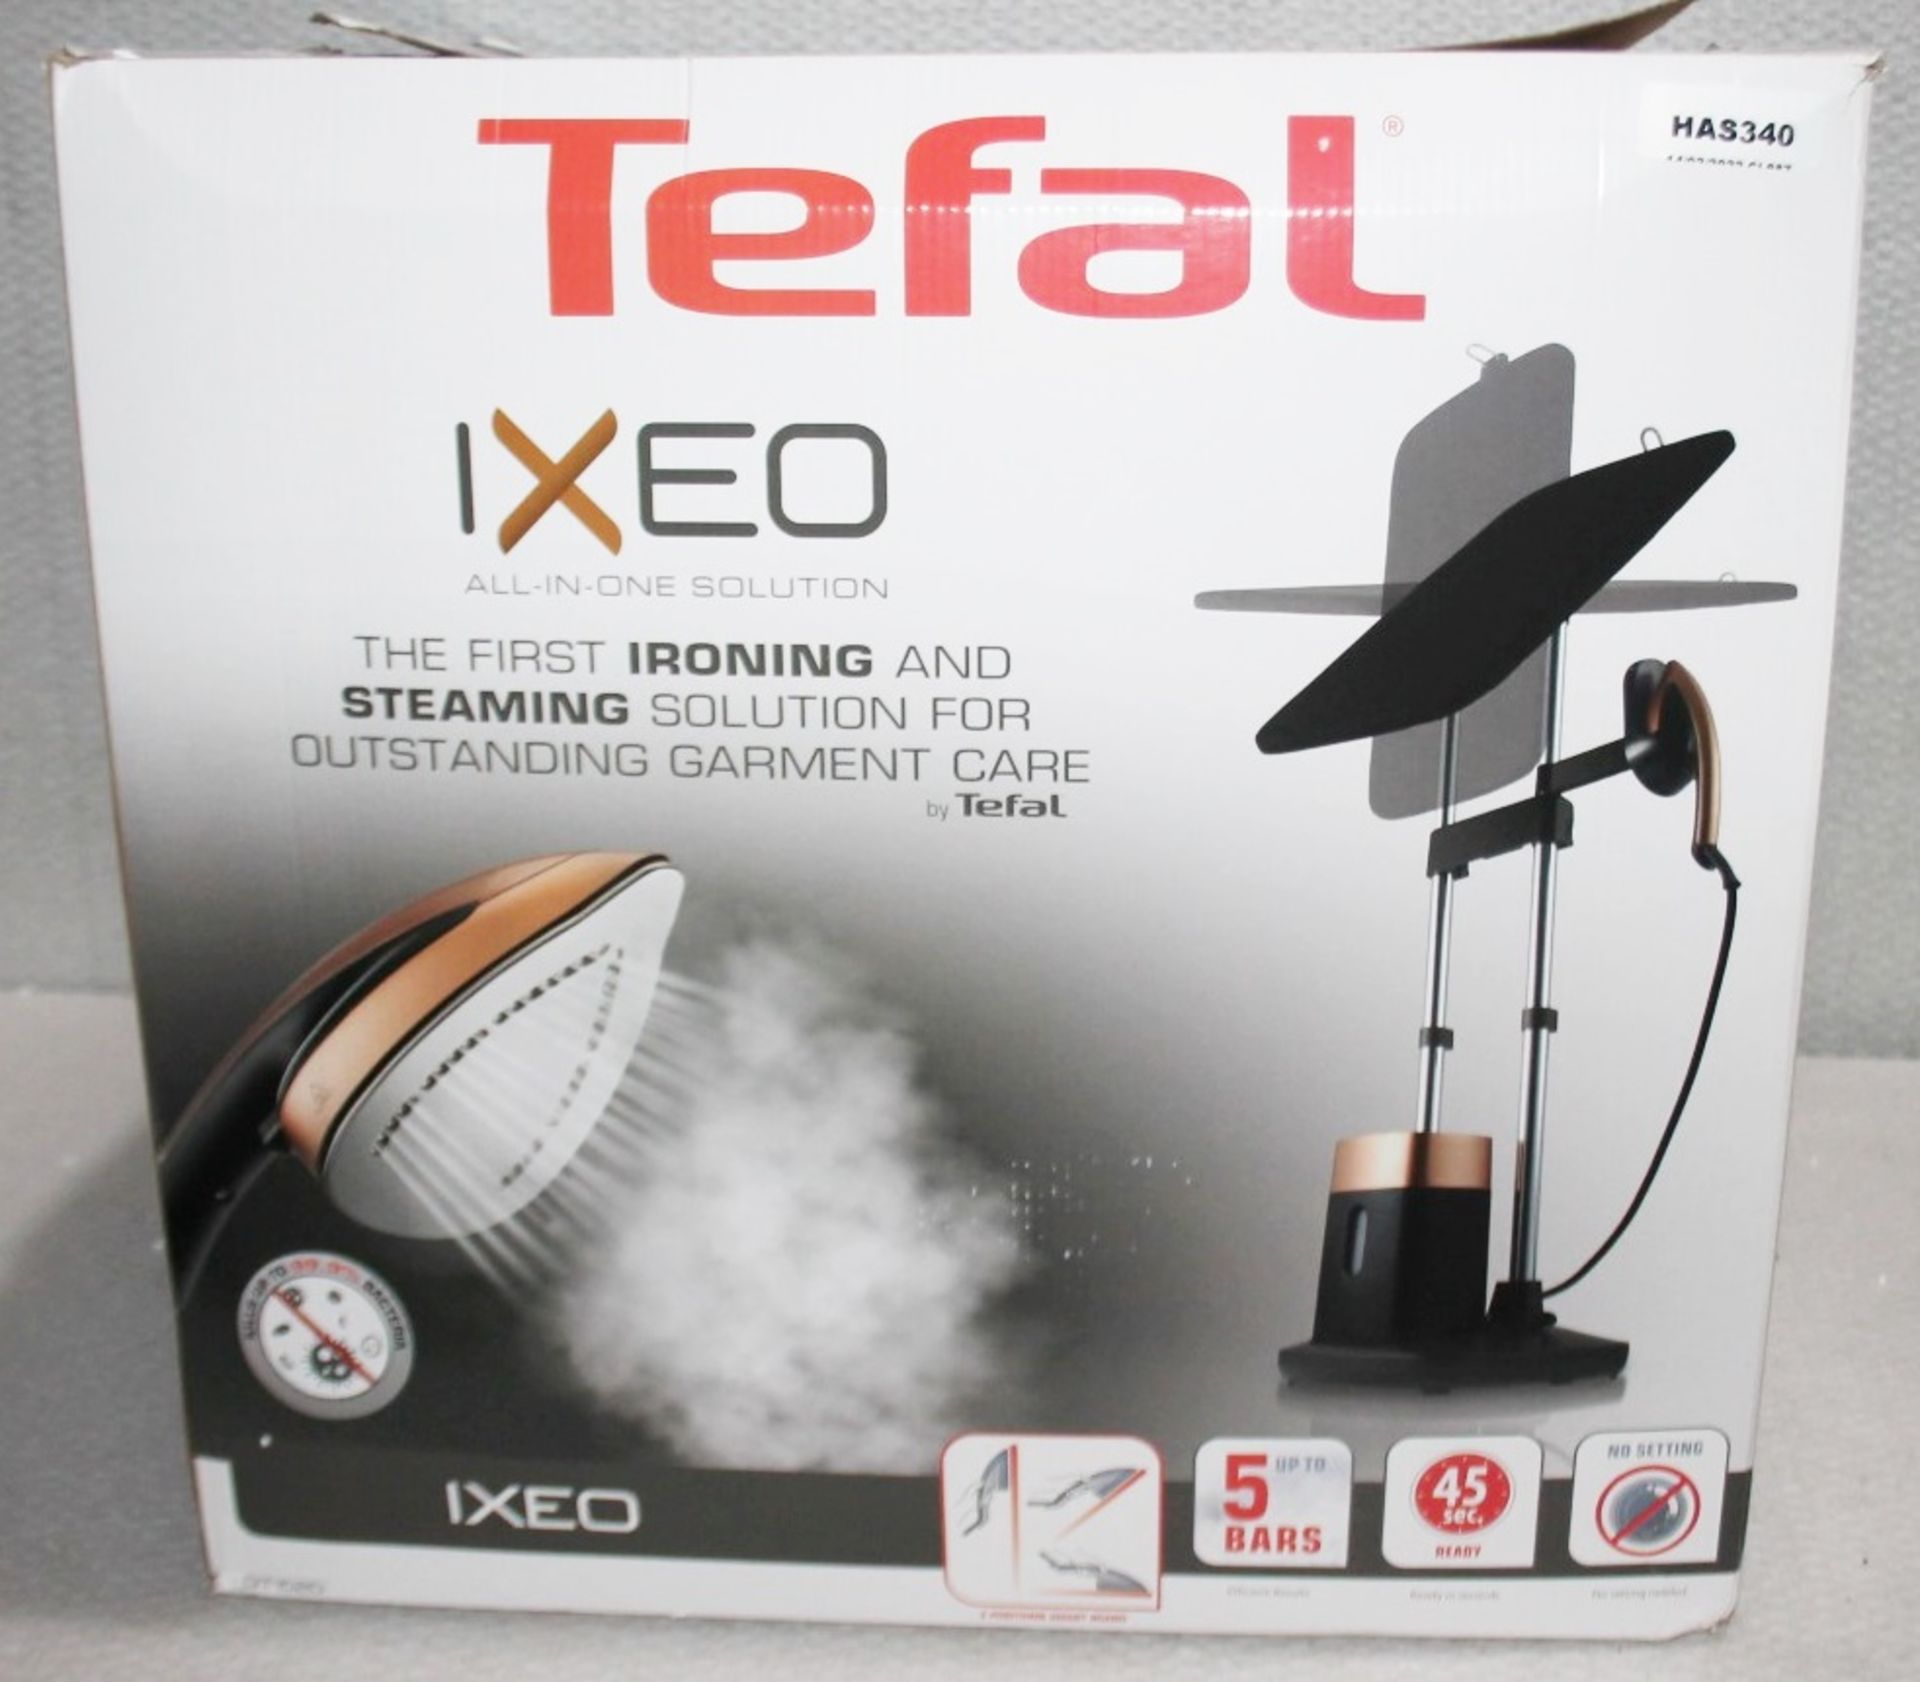 1 x TEFAL 'Ixeo' All-In-One Garment Steamer Solution - Original Price £289.99 - Unused Boxed Stock - Image 2 of 9